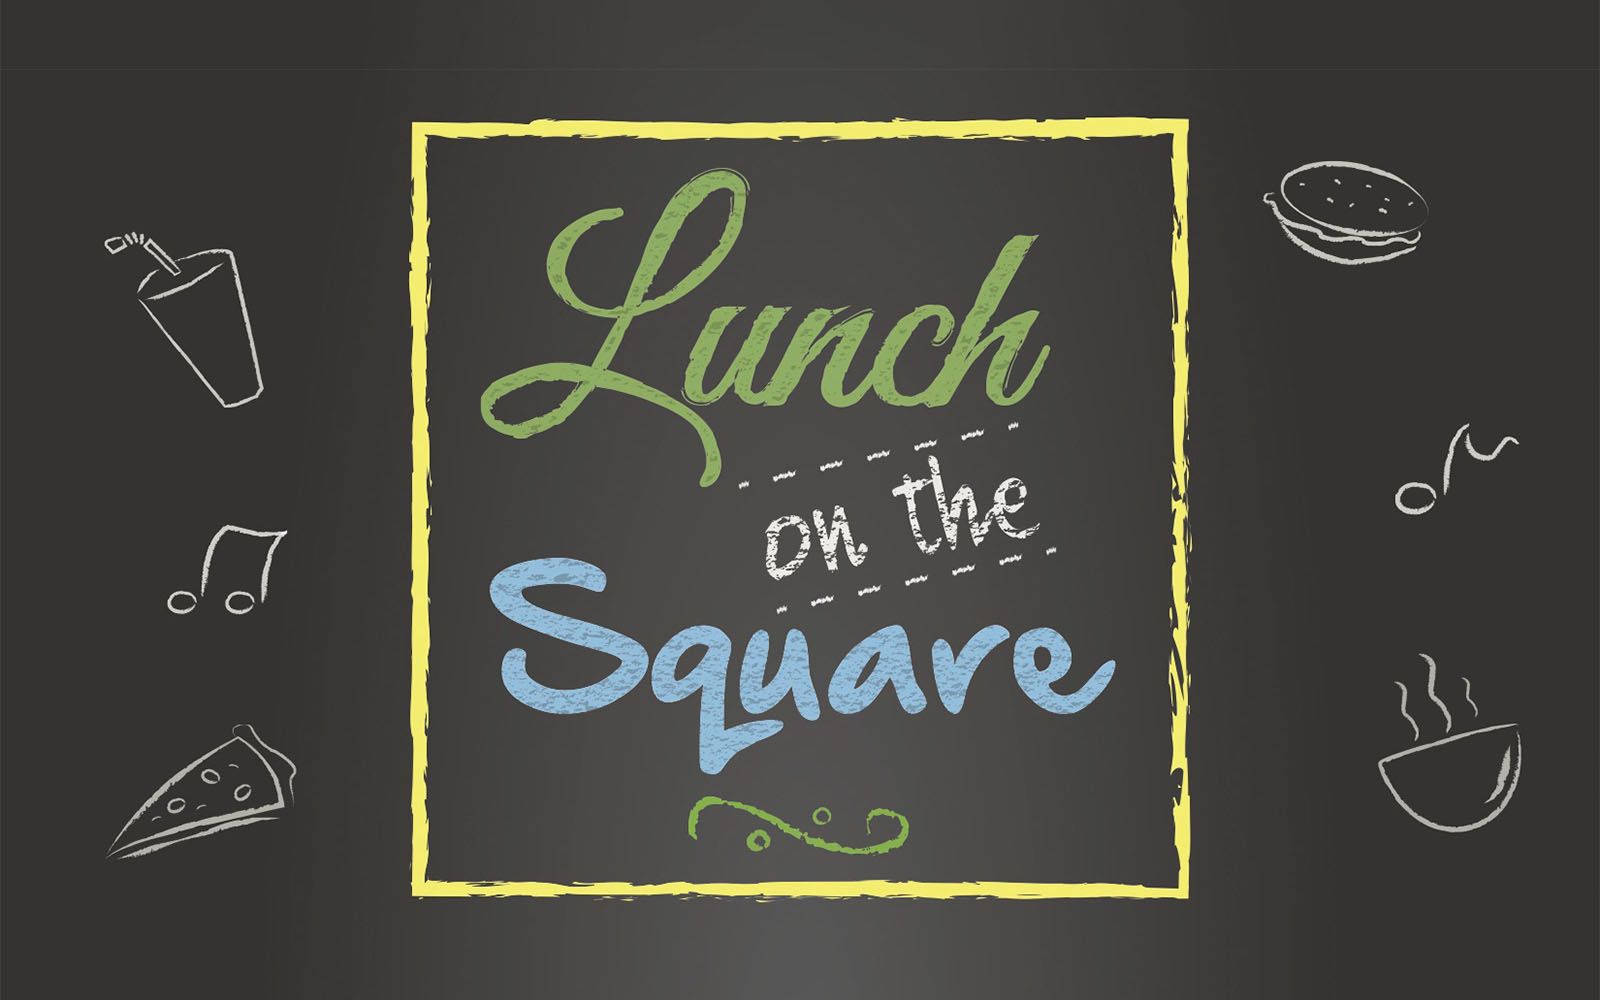 Lunch on the Square logo